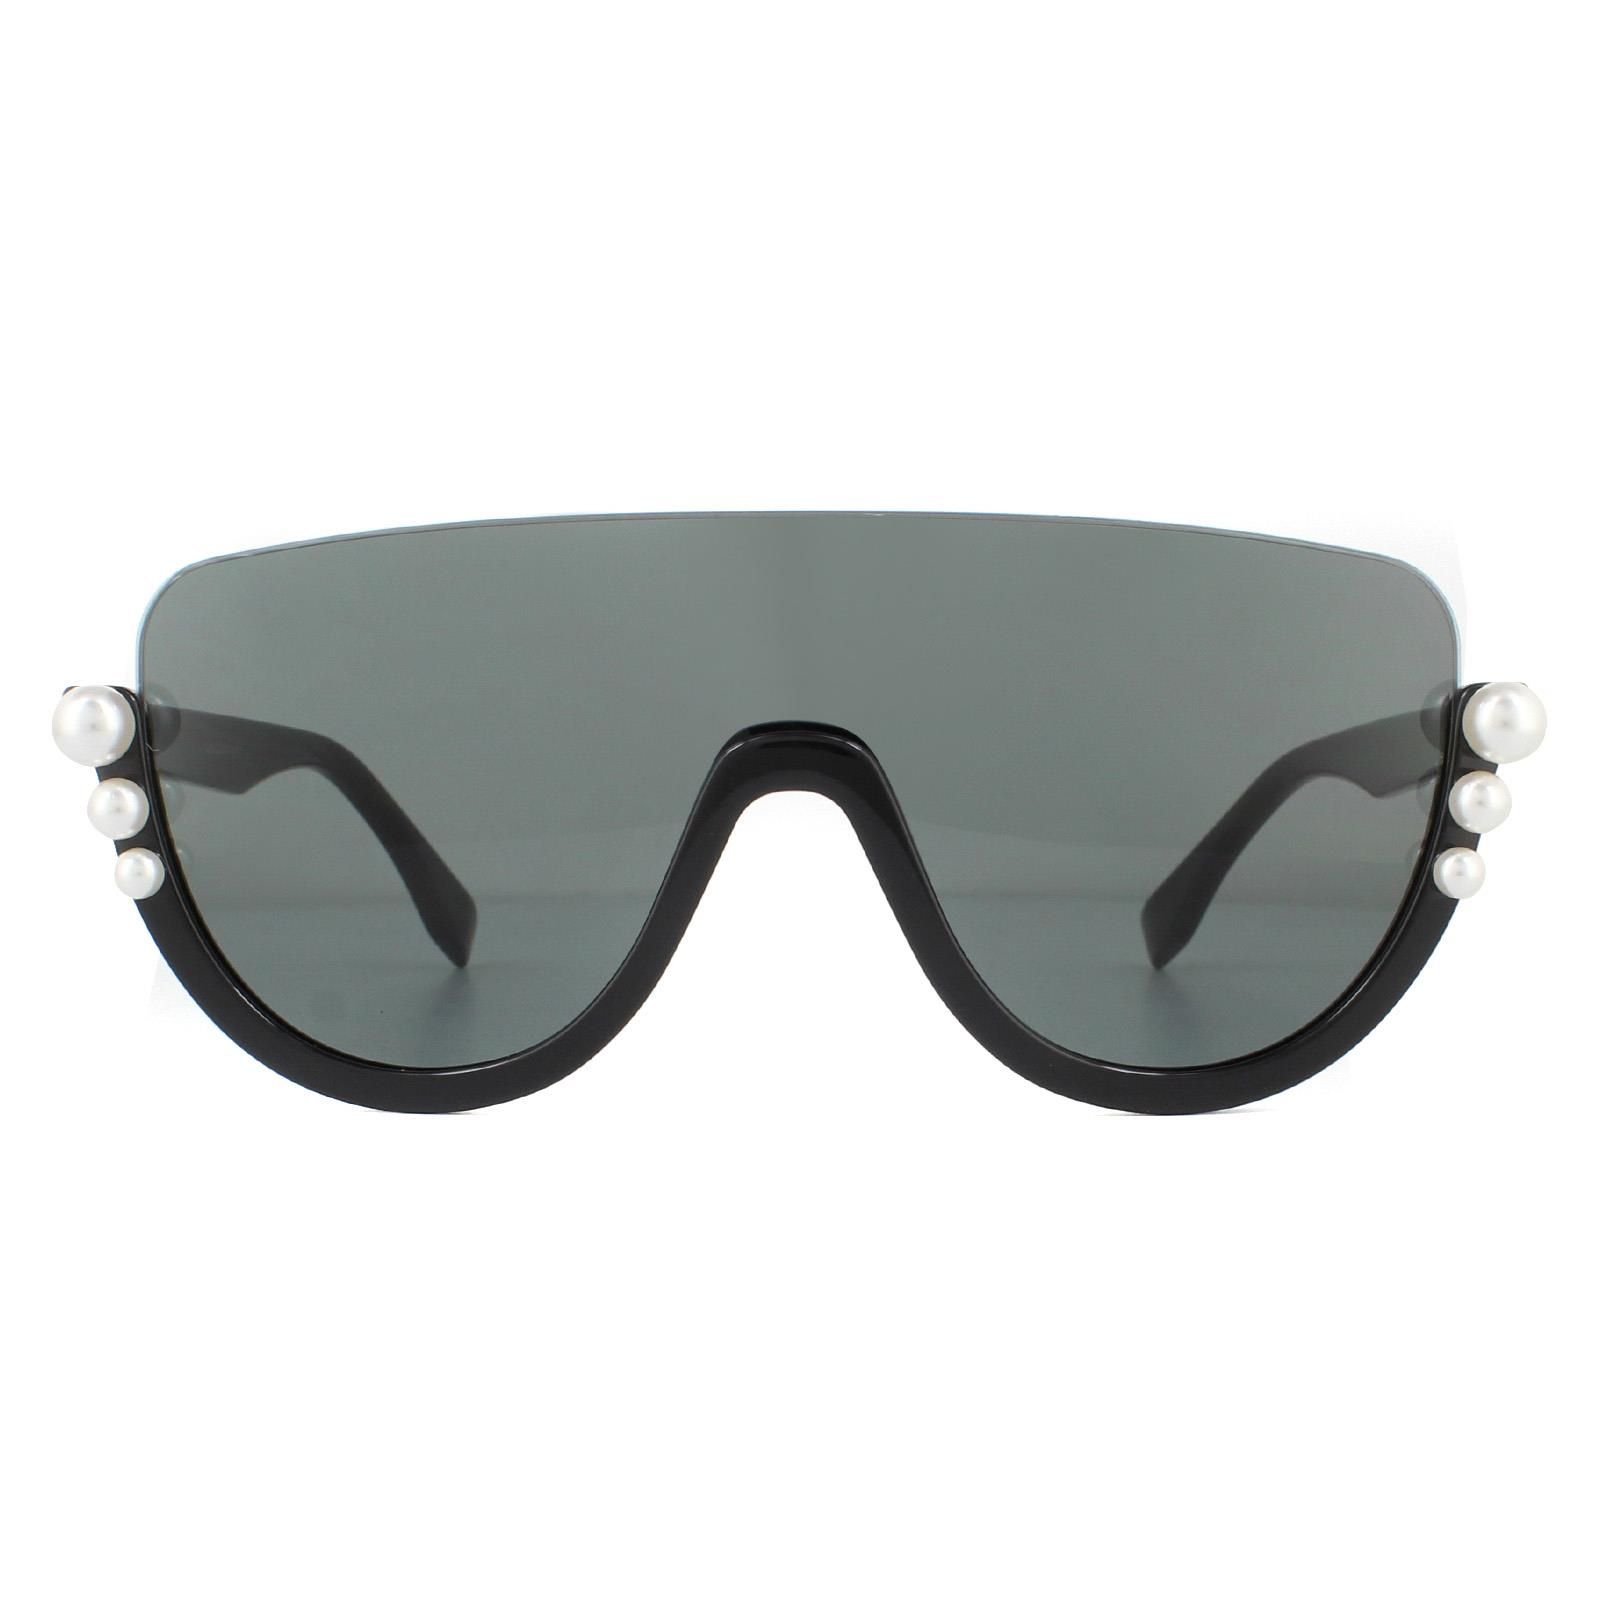 Fendi Sunglasses FF0296/S 807 IR Black Grey are a truly unique style with an upside down style design with the frame at the bottom and rimless at the top. 3 decreasing size pearls feature at the sides for a luxury embellishment.